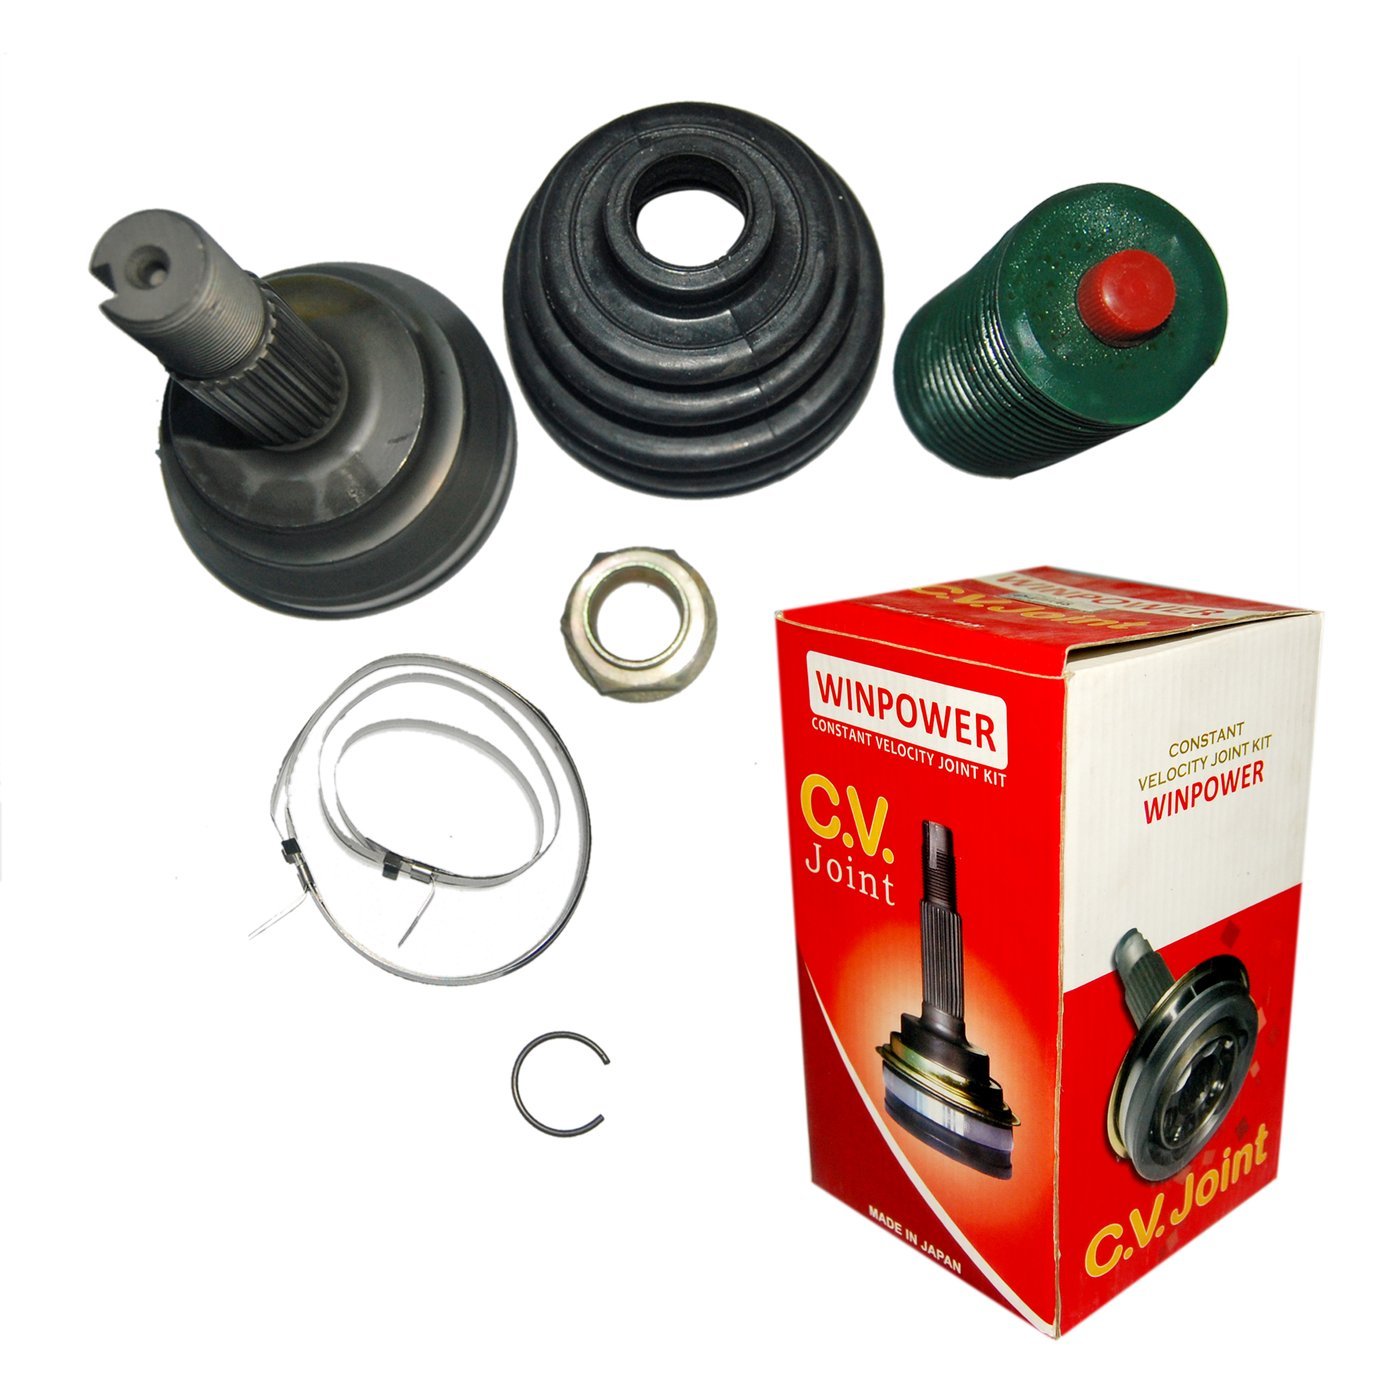 CV Joint, WINPOWER, 43410-52070, TO-35, 23(in)x58(D)x24(out) (000743) - Win Store